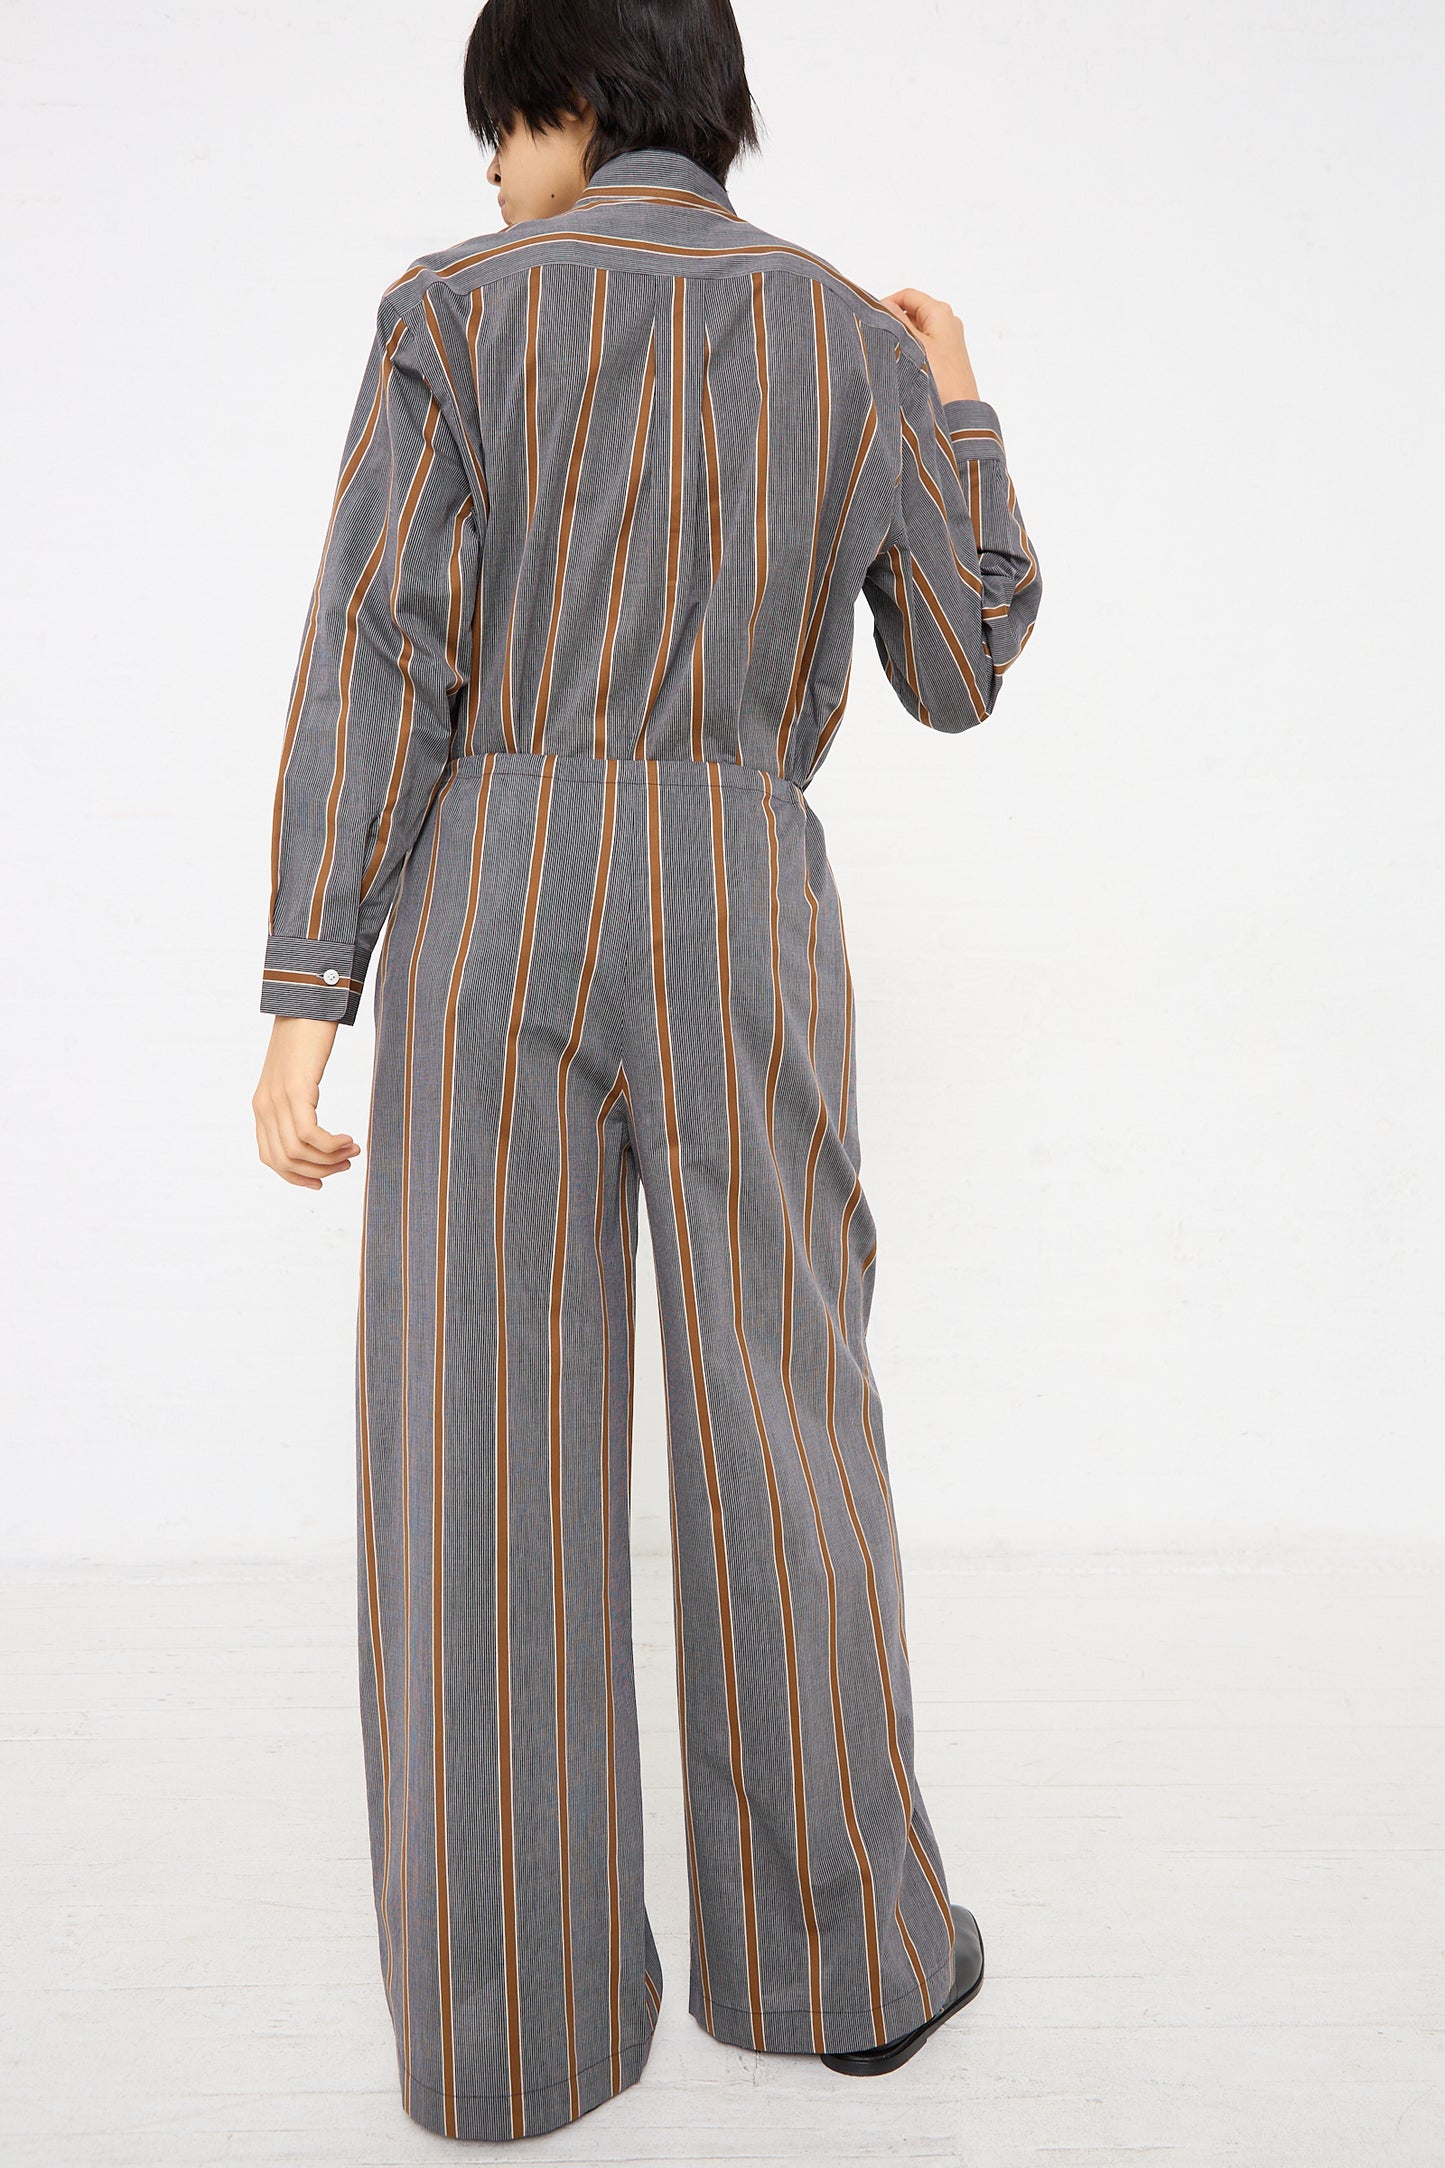 The back view of a woman in an oversized drawstring Maxi Large Pant jumpsuit made of lightweight Japanese cotton by Cristaseya.